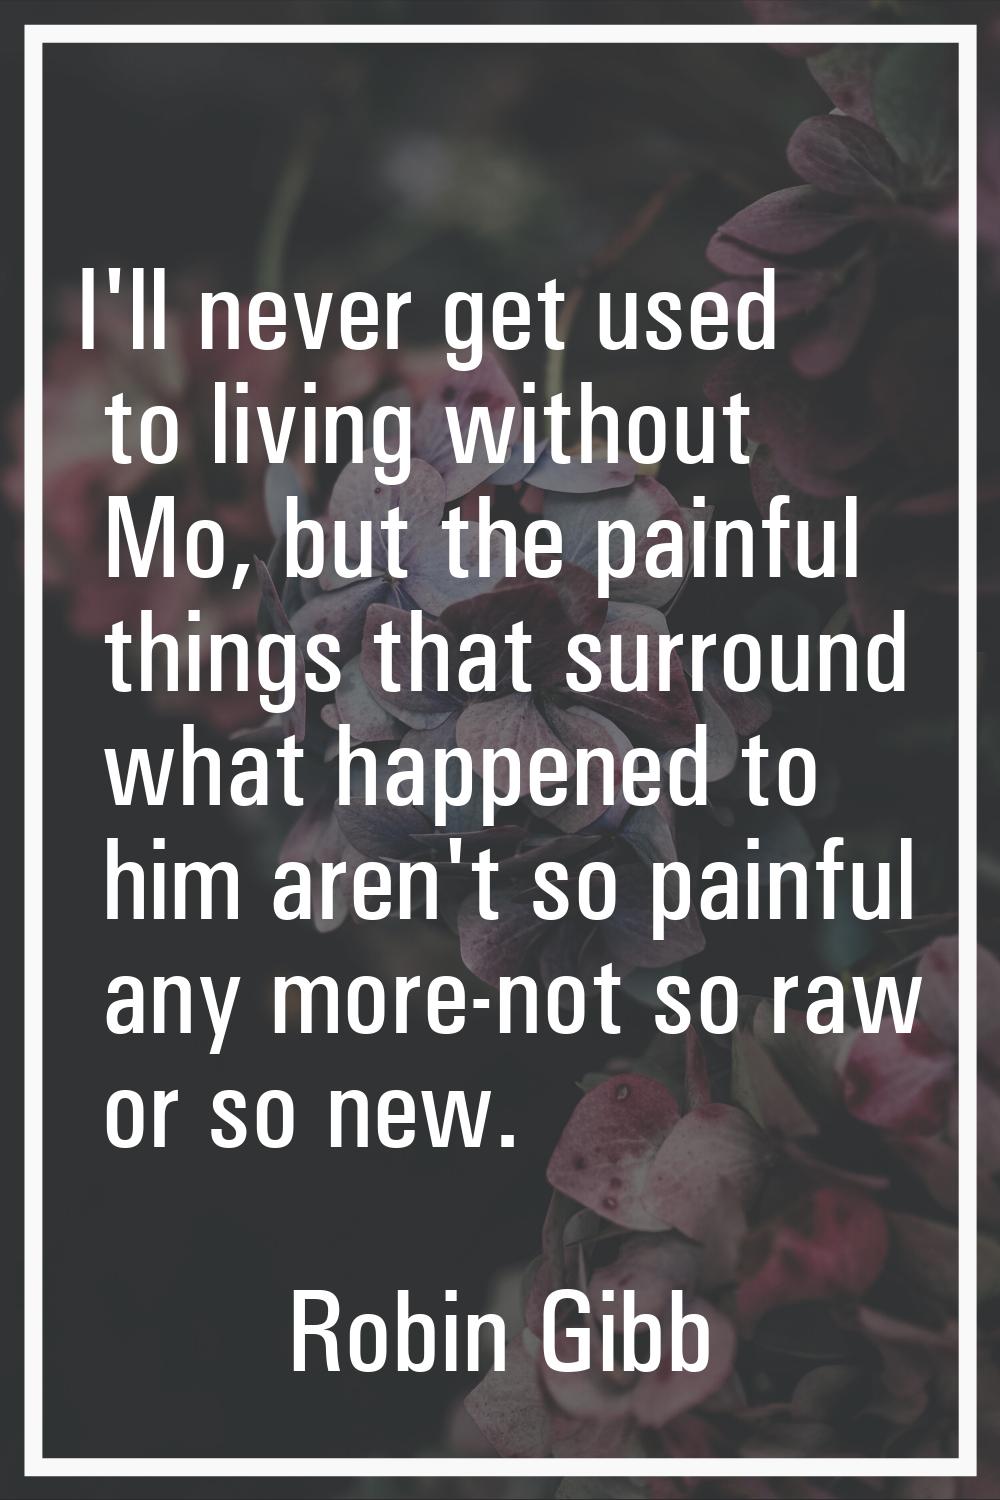 I'll never get used to living without Mo, but the painful things that surround what happened to him